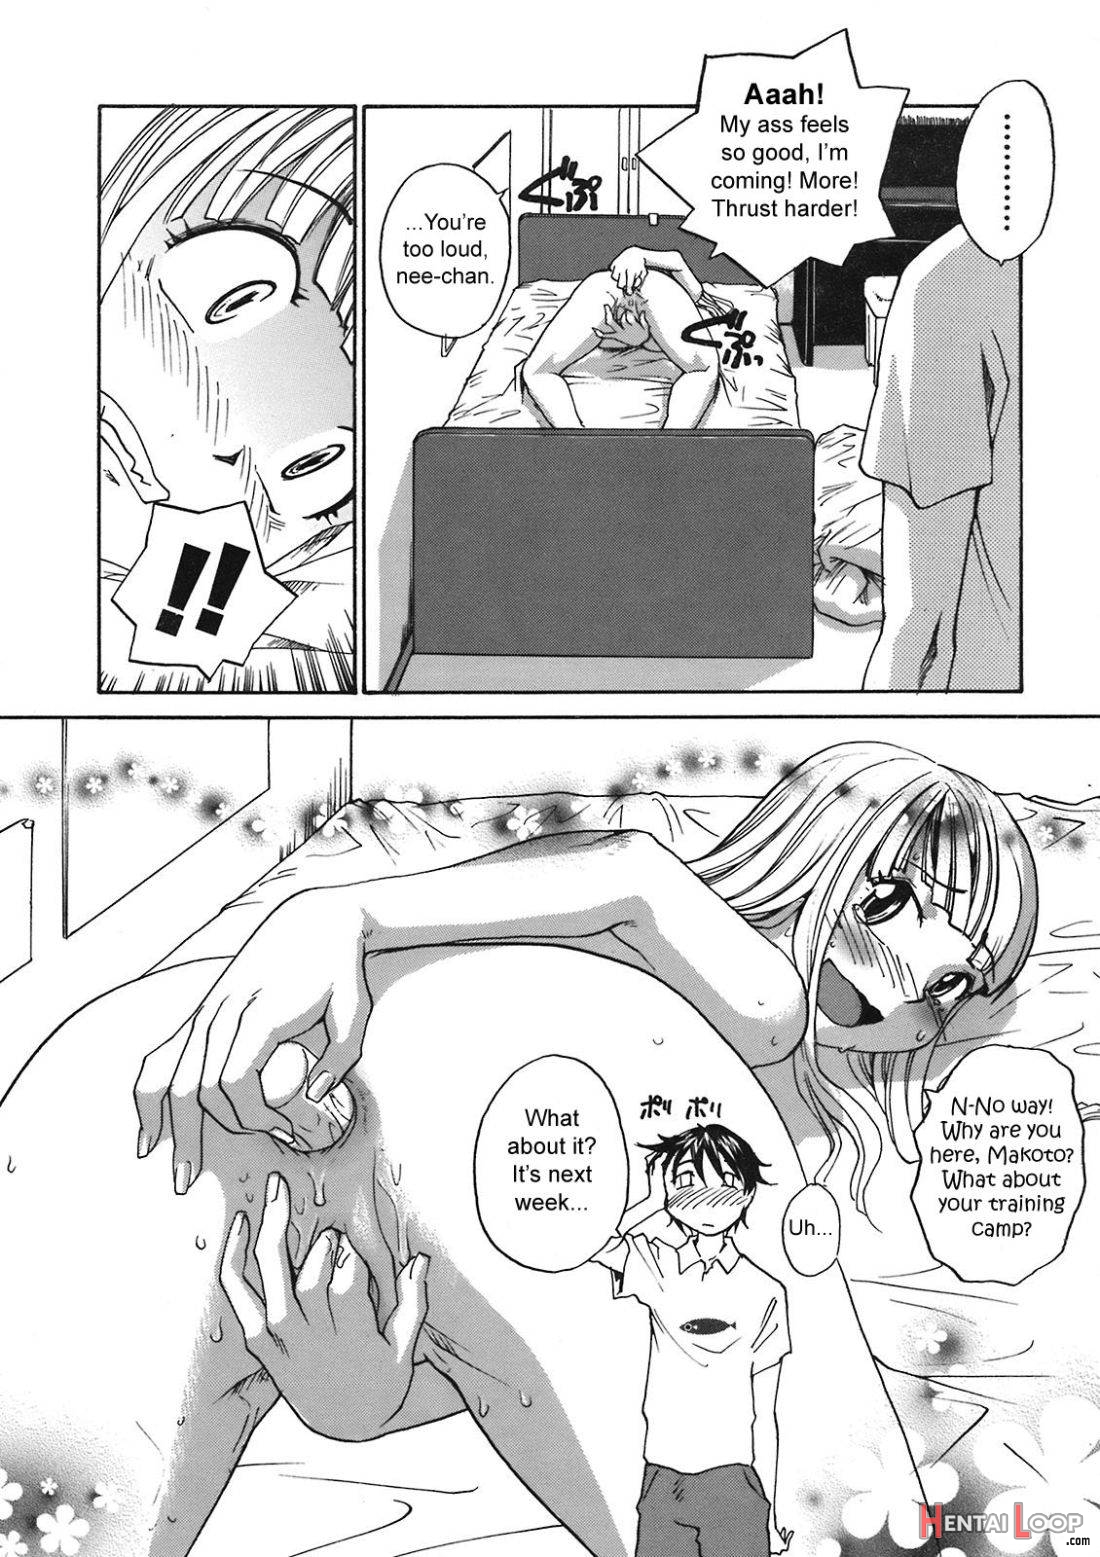 Back to Nee-chan page 6